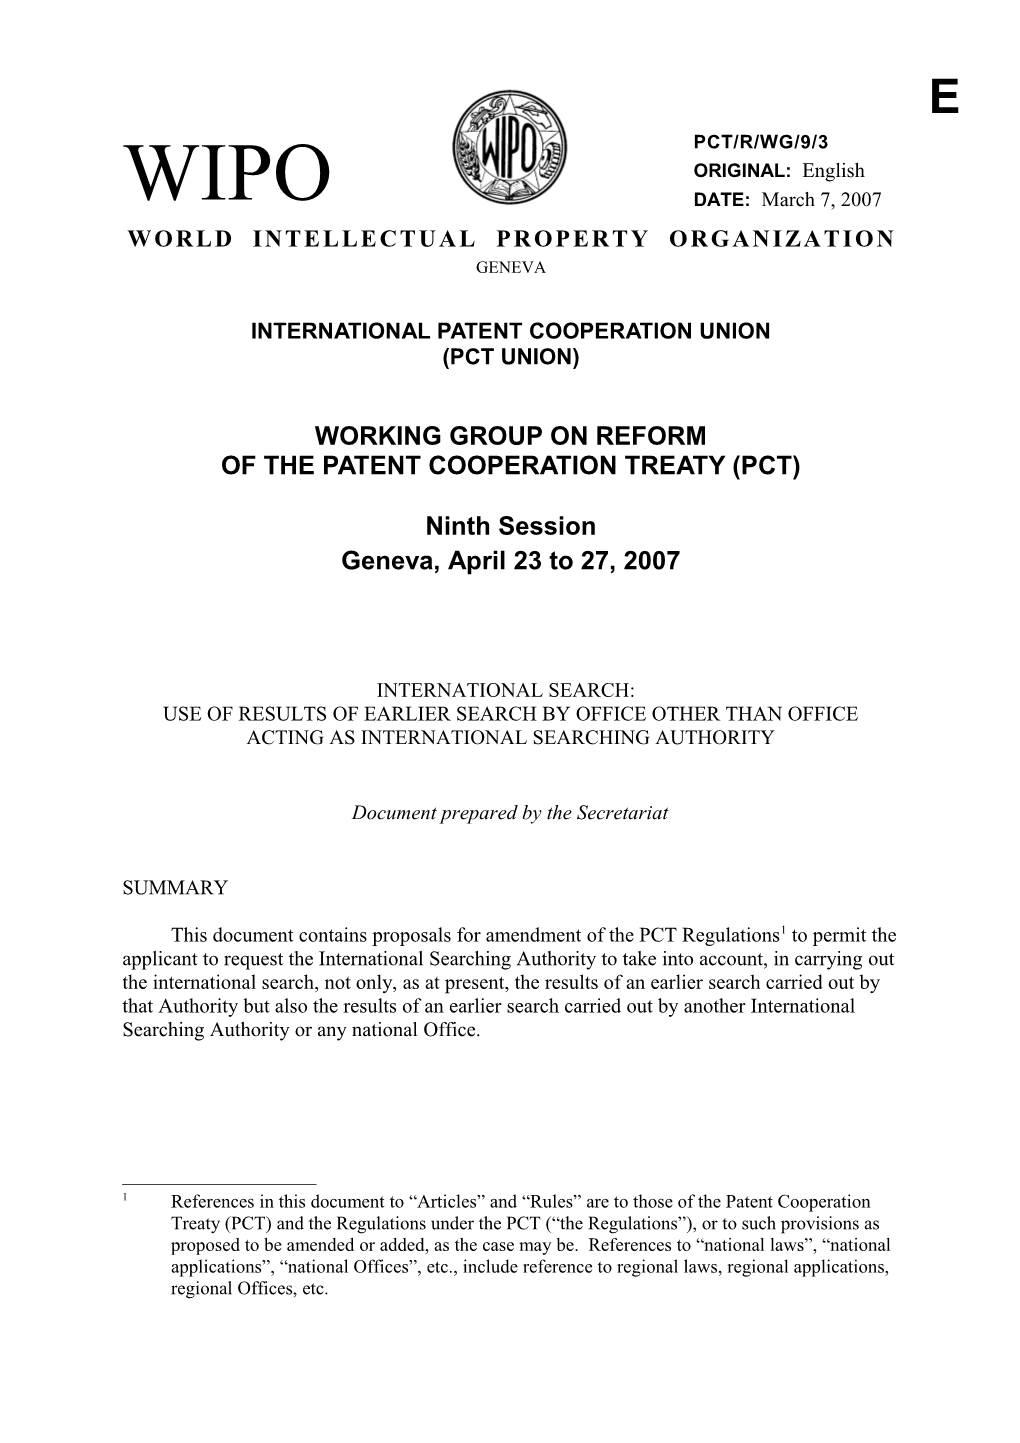 PCT/R/WG/9/3: International Search: Use of Results of Earlier Search by Office Other Than